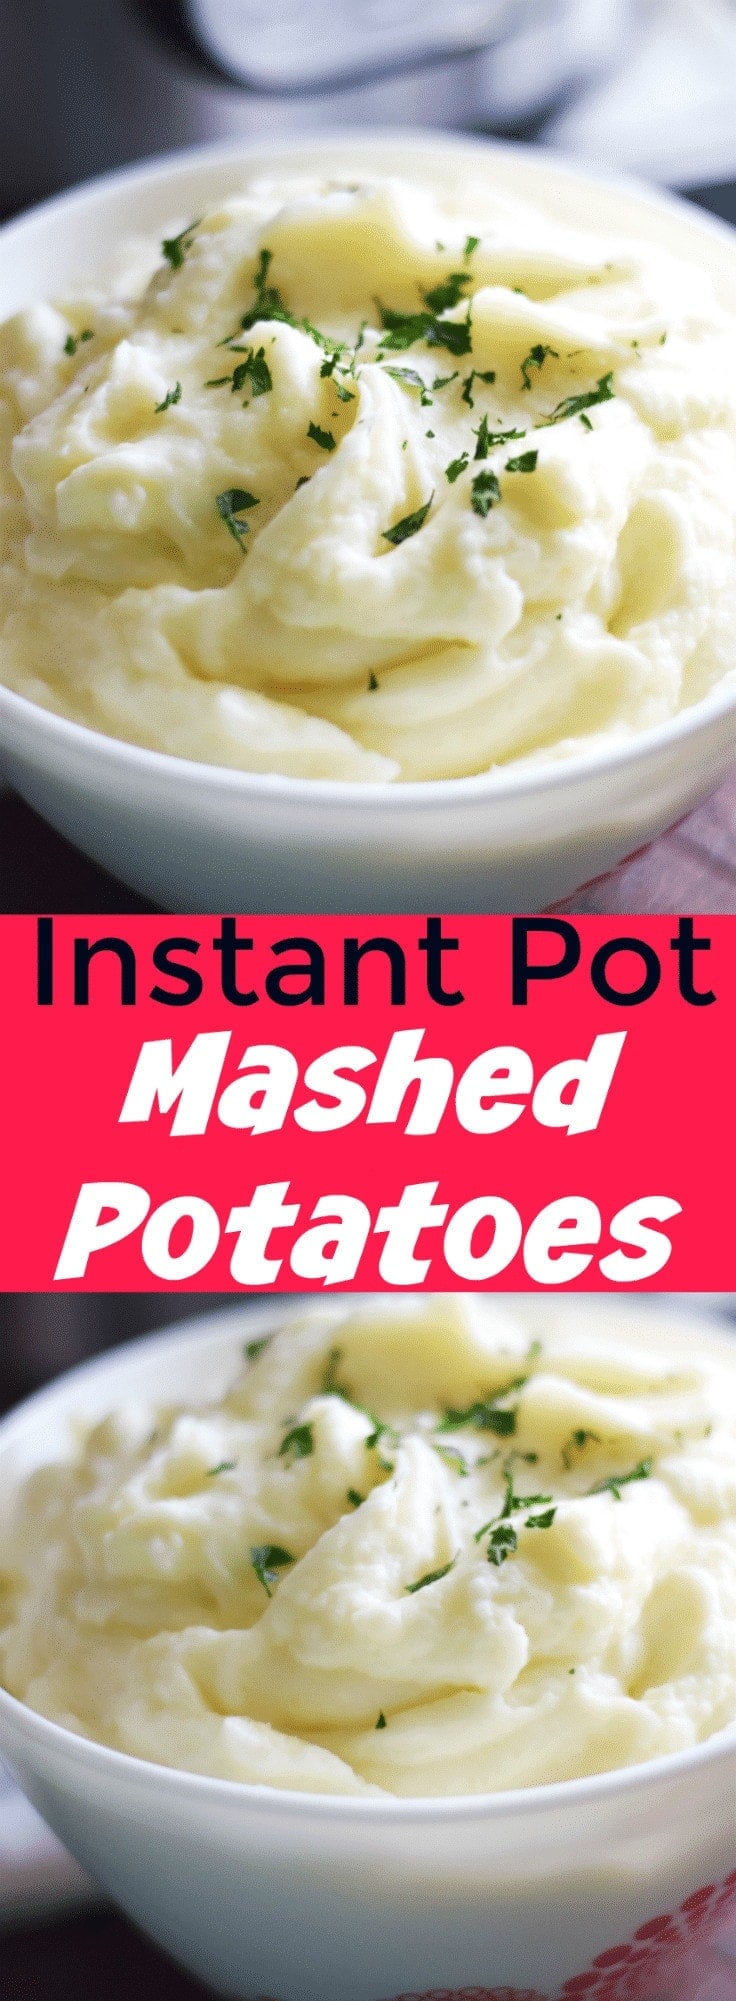 pinterest image for this instant pot mashed potatoes recipe